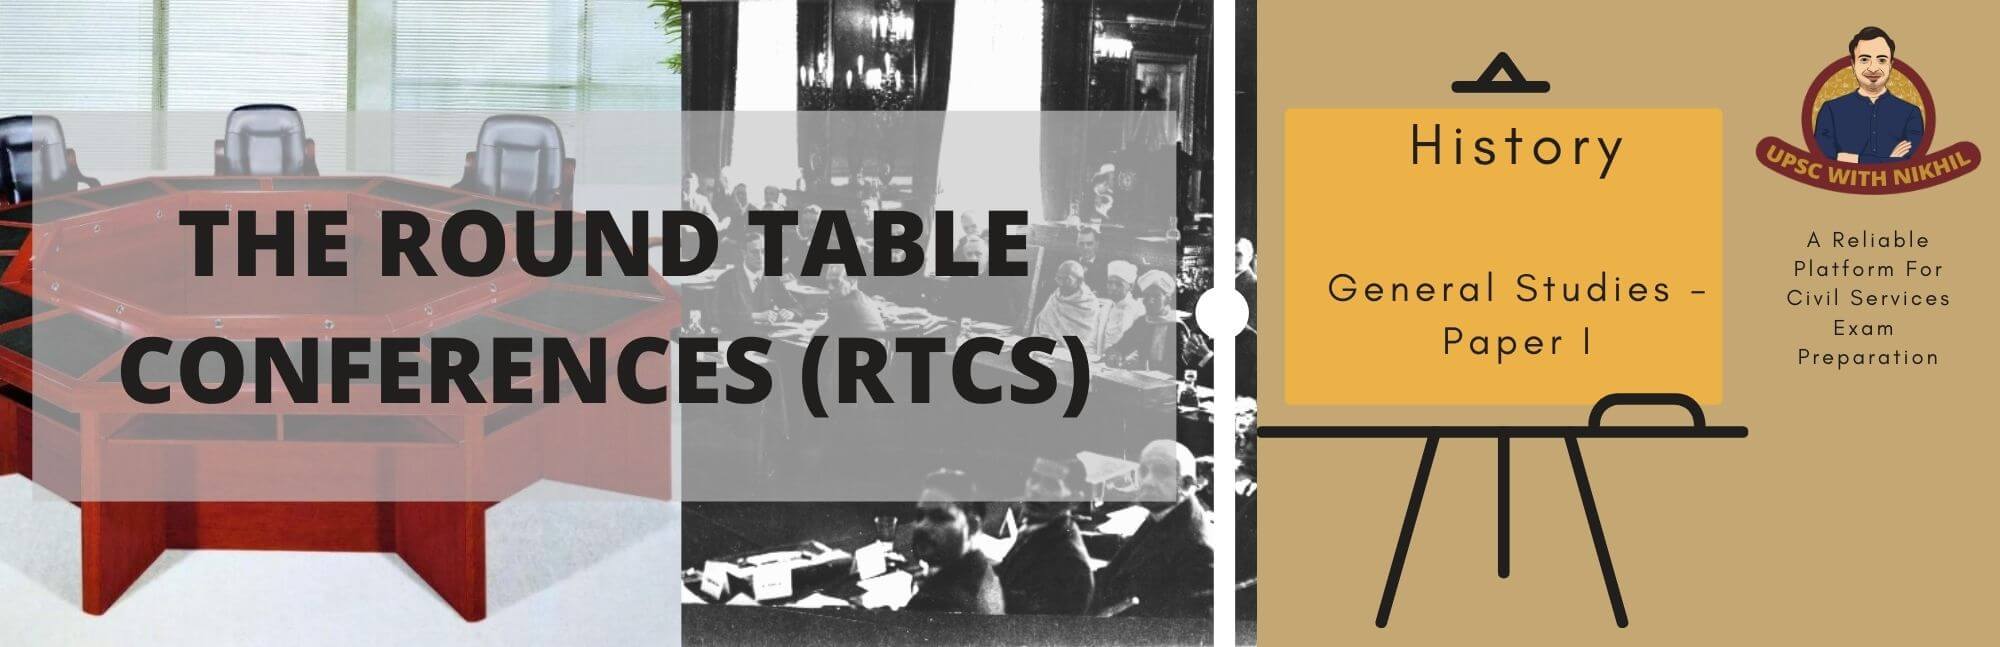 The Round Table Conferences Rtcs, First Round Table Conference Was Held In